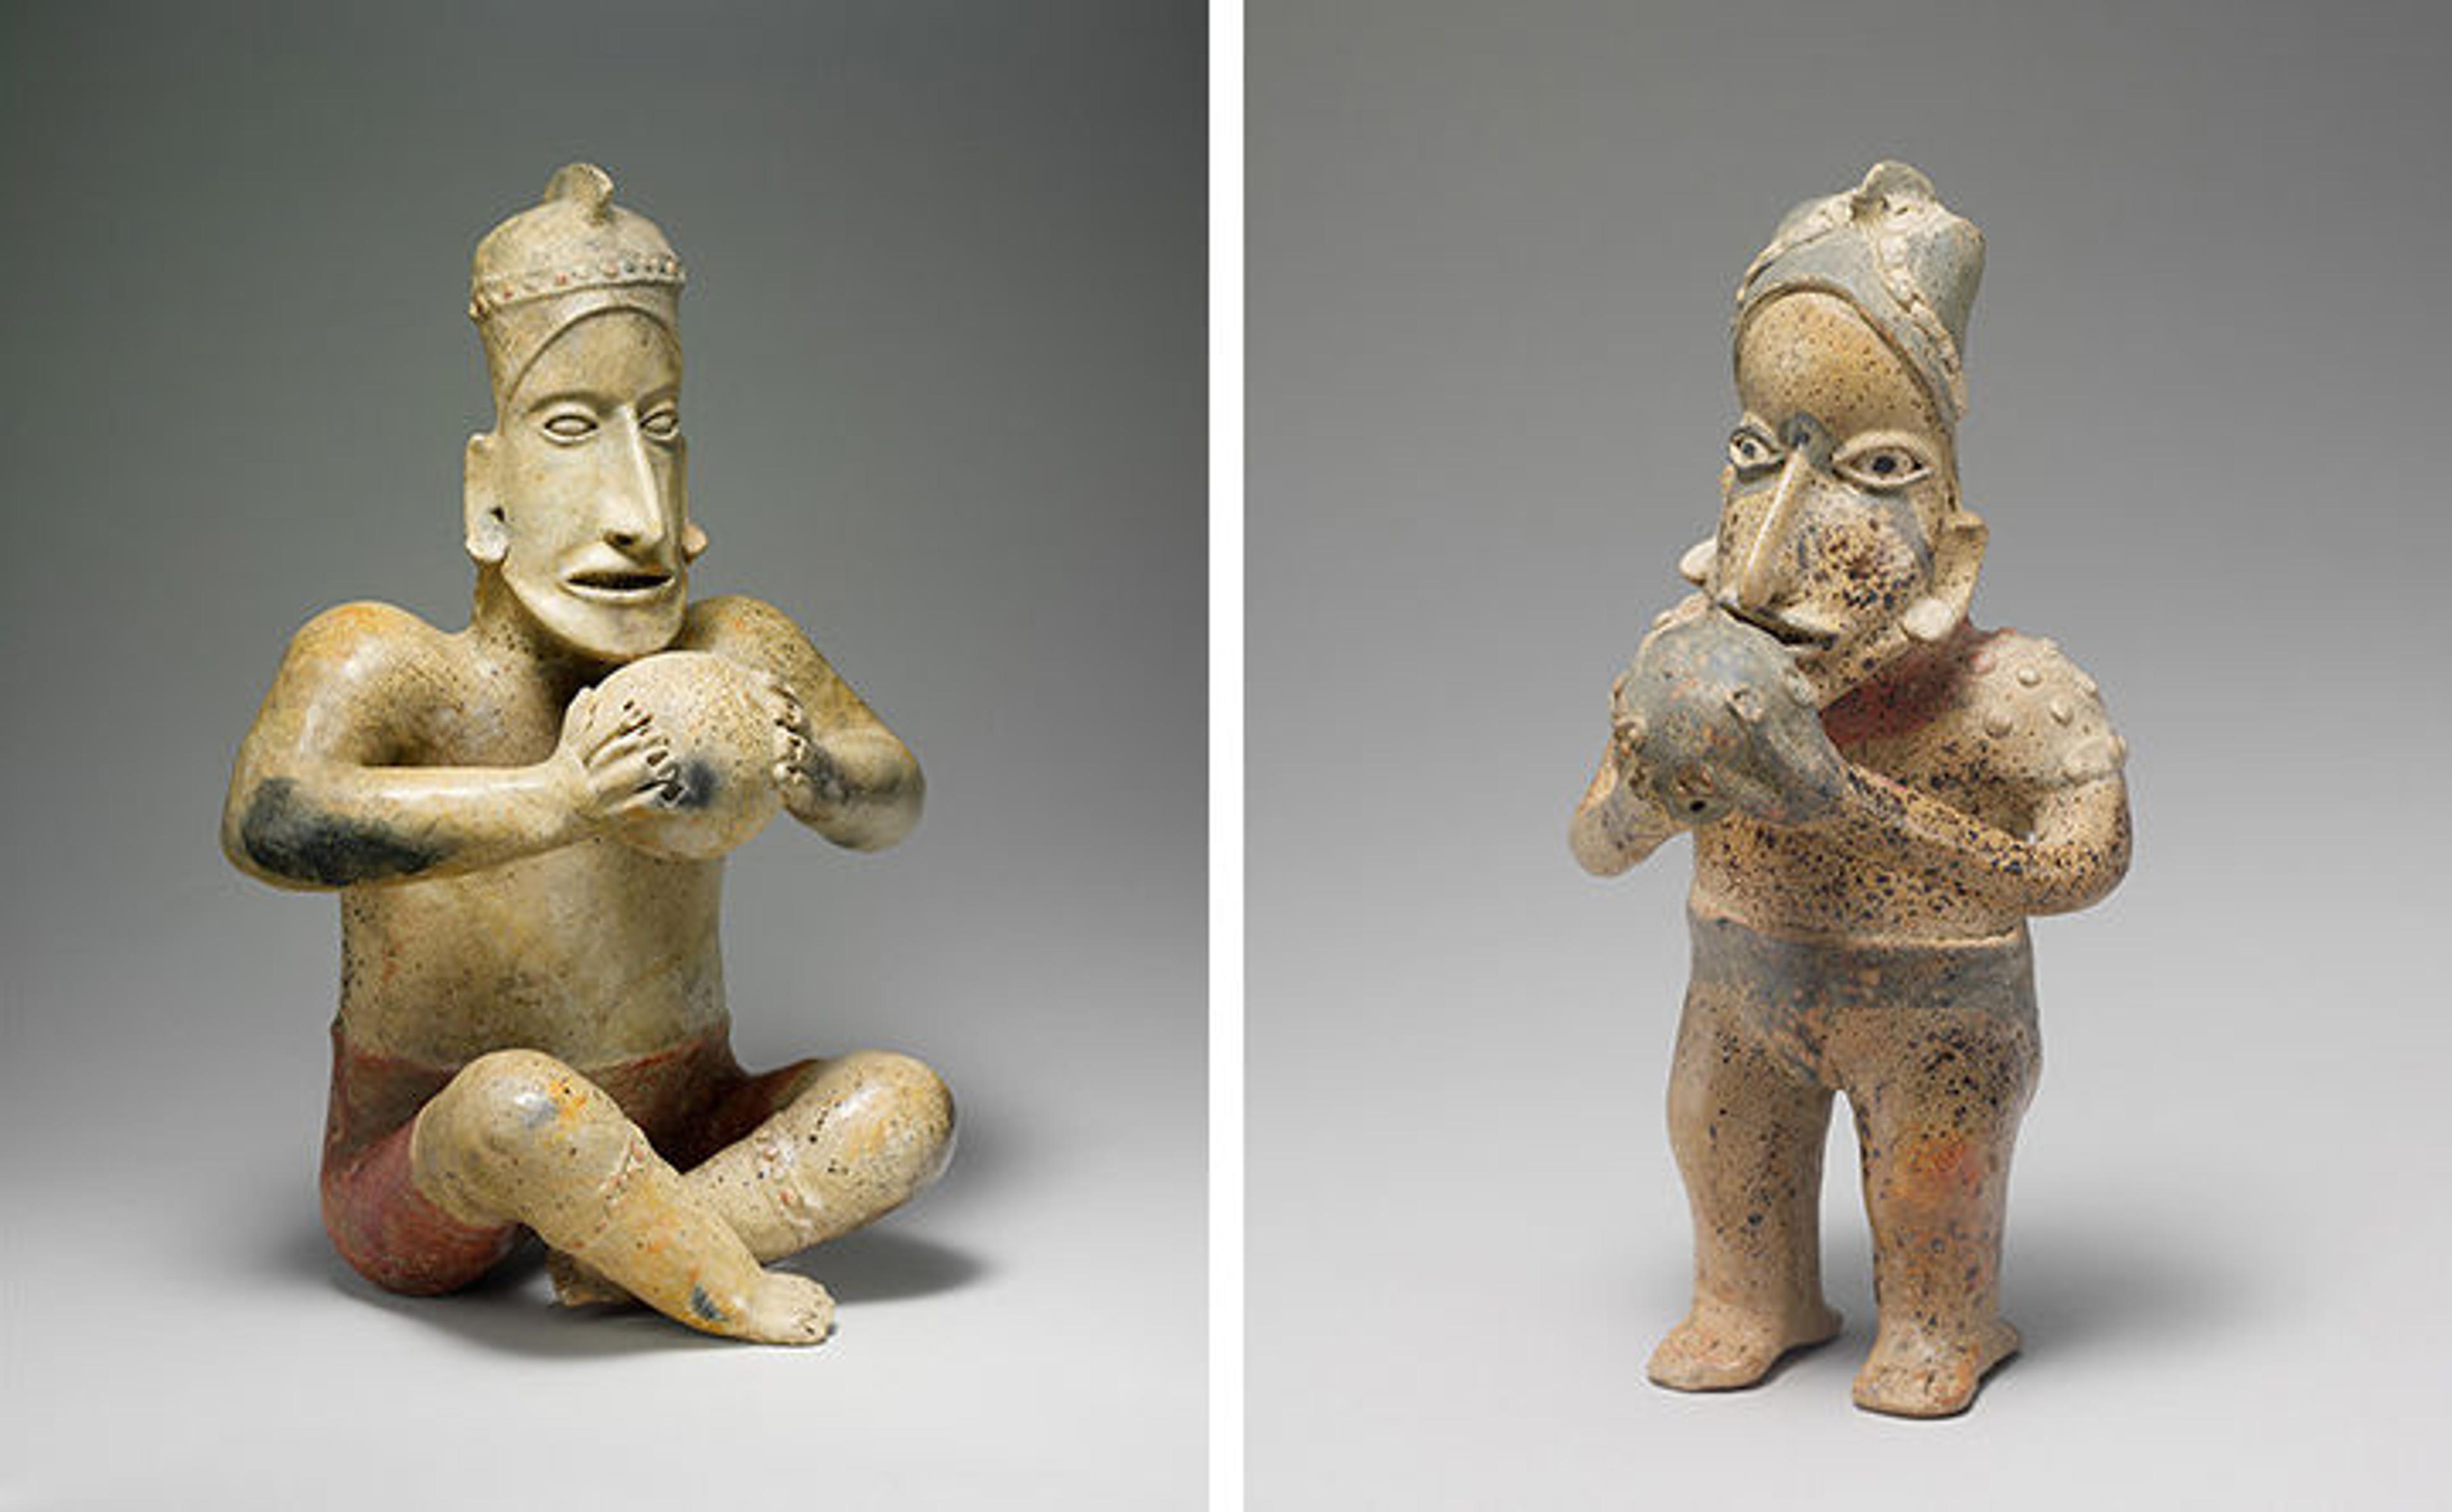 Two ceramic figures, each holding a large ball